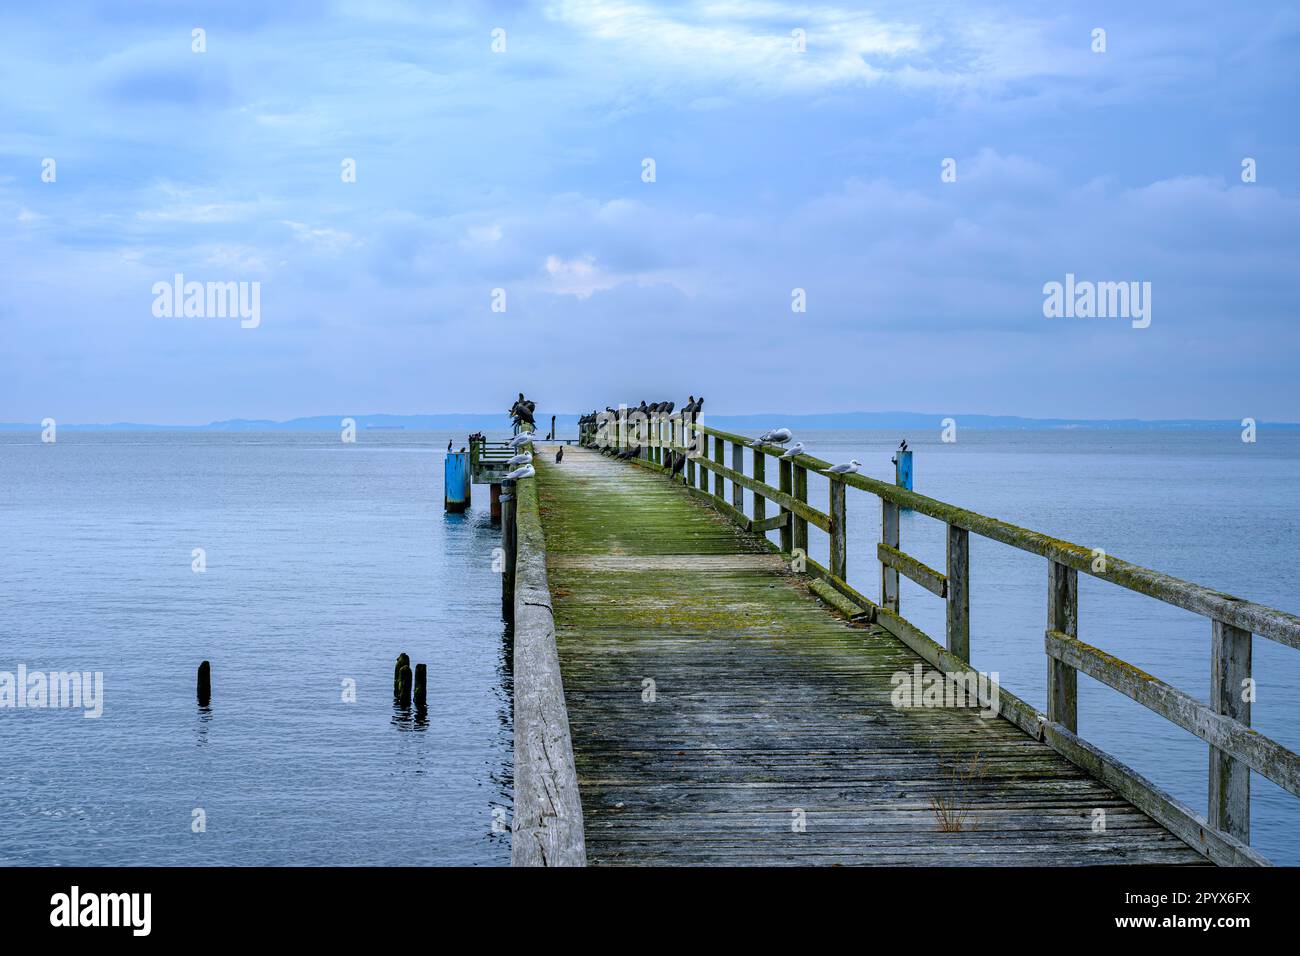 Old pier at the seafront of Sassnitz, Mecklenburg-Western Pomerania, Rugen Island, Germany, Europe. Stock Photo